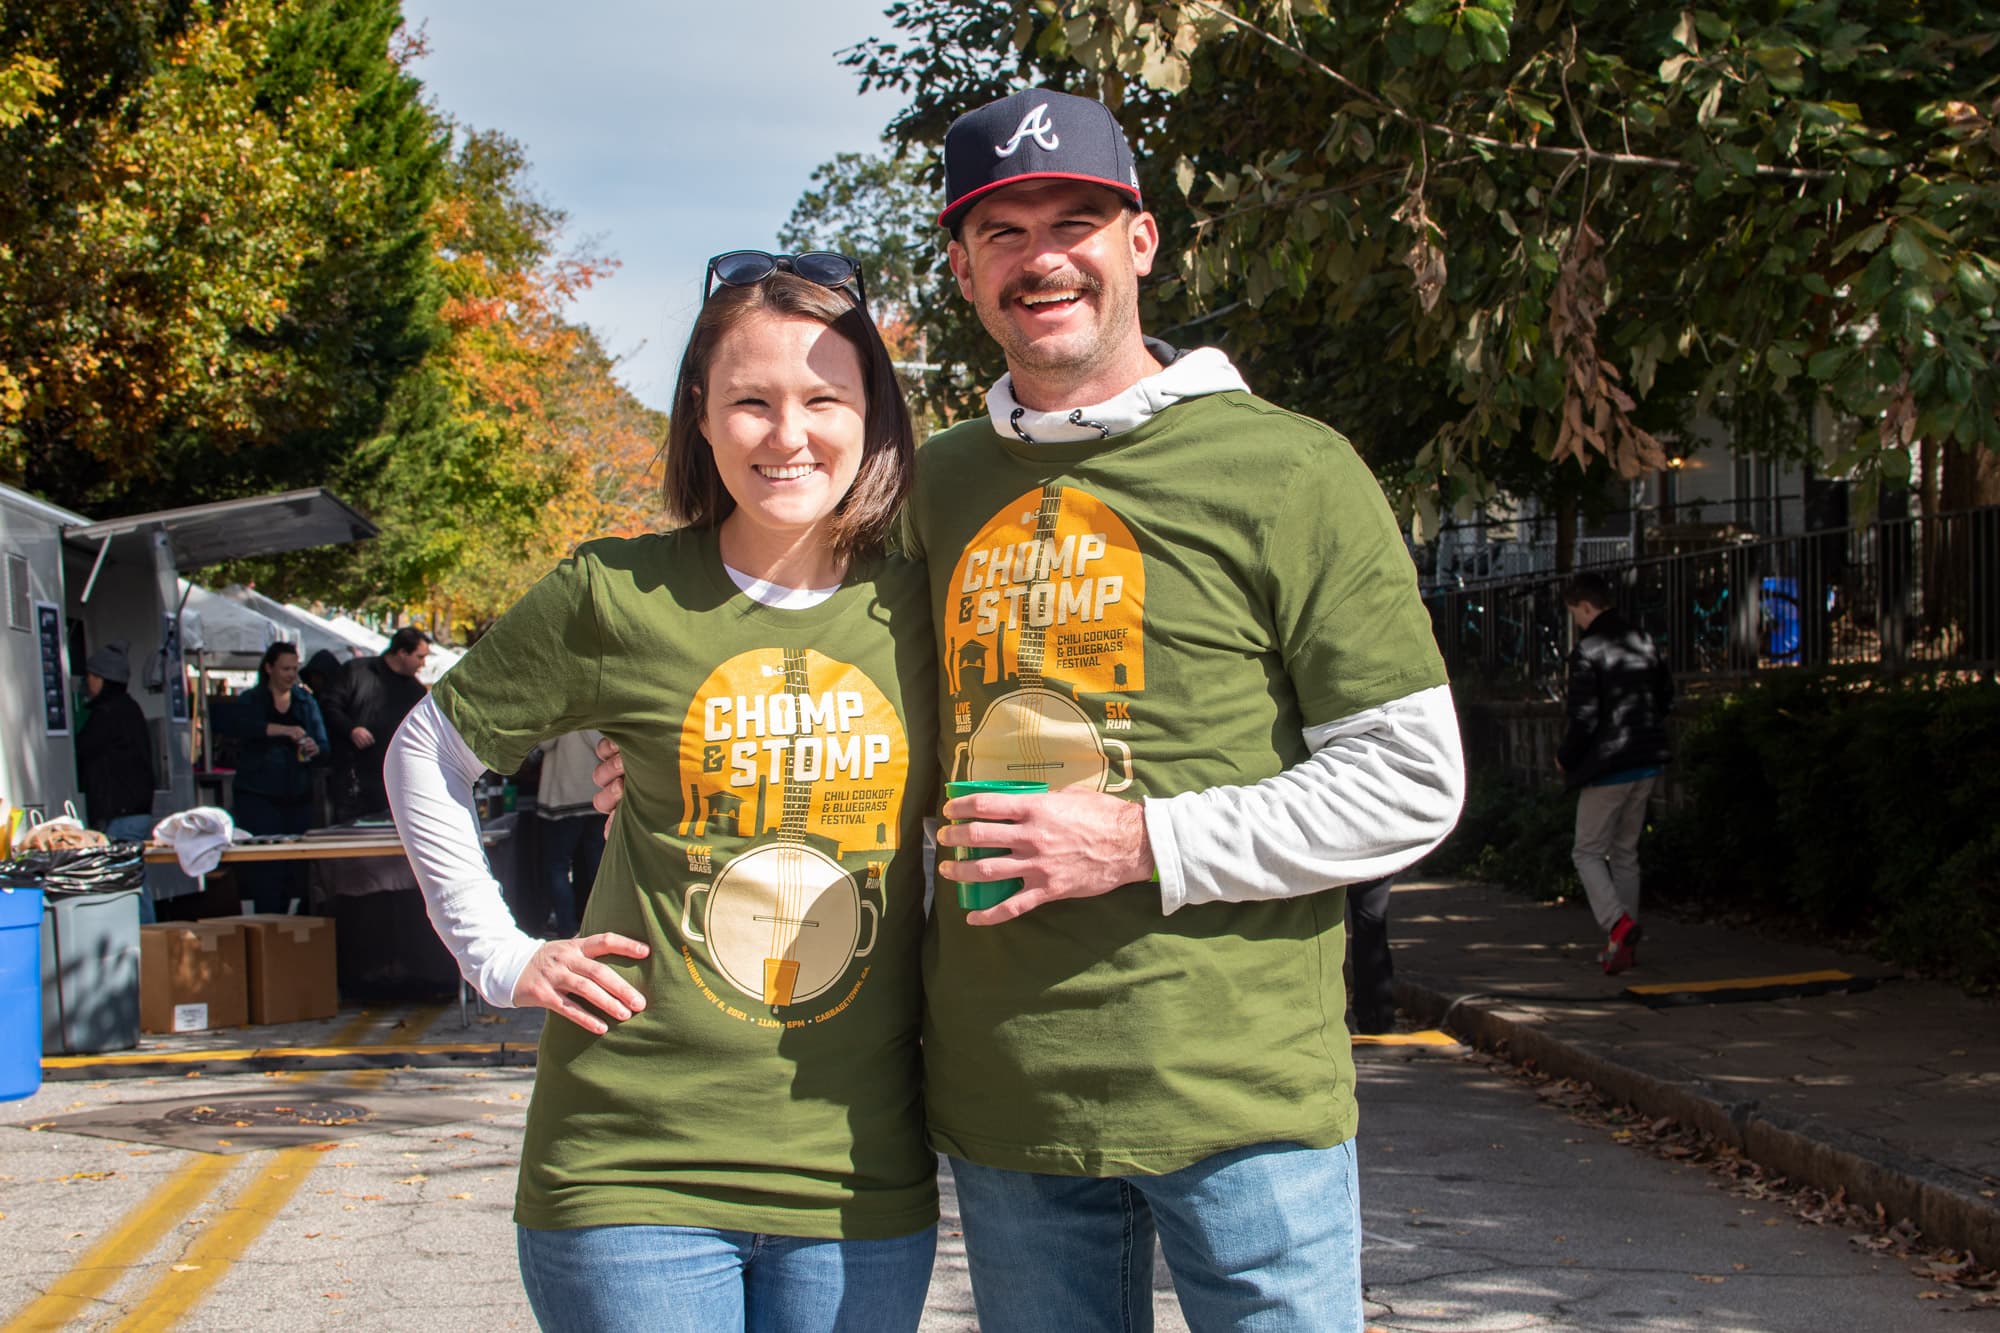 Two people wearing shirts for a local Chili Cookout and Bluegrass event stand side by side smiling. 